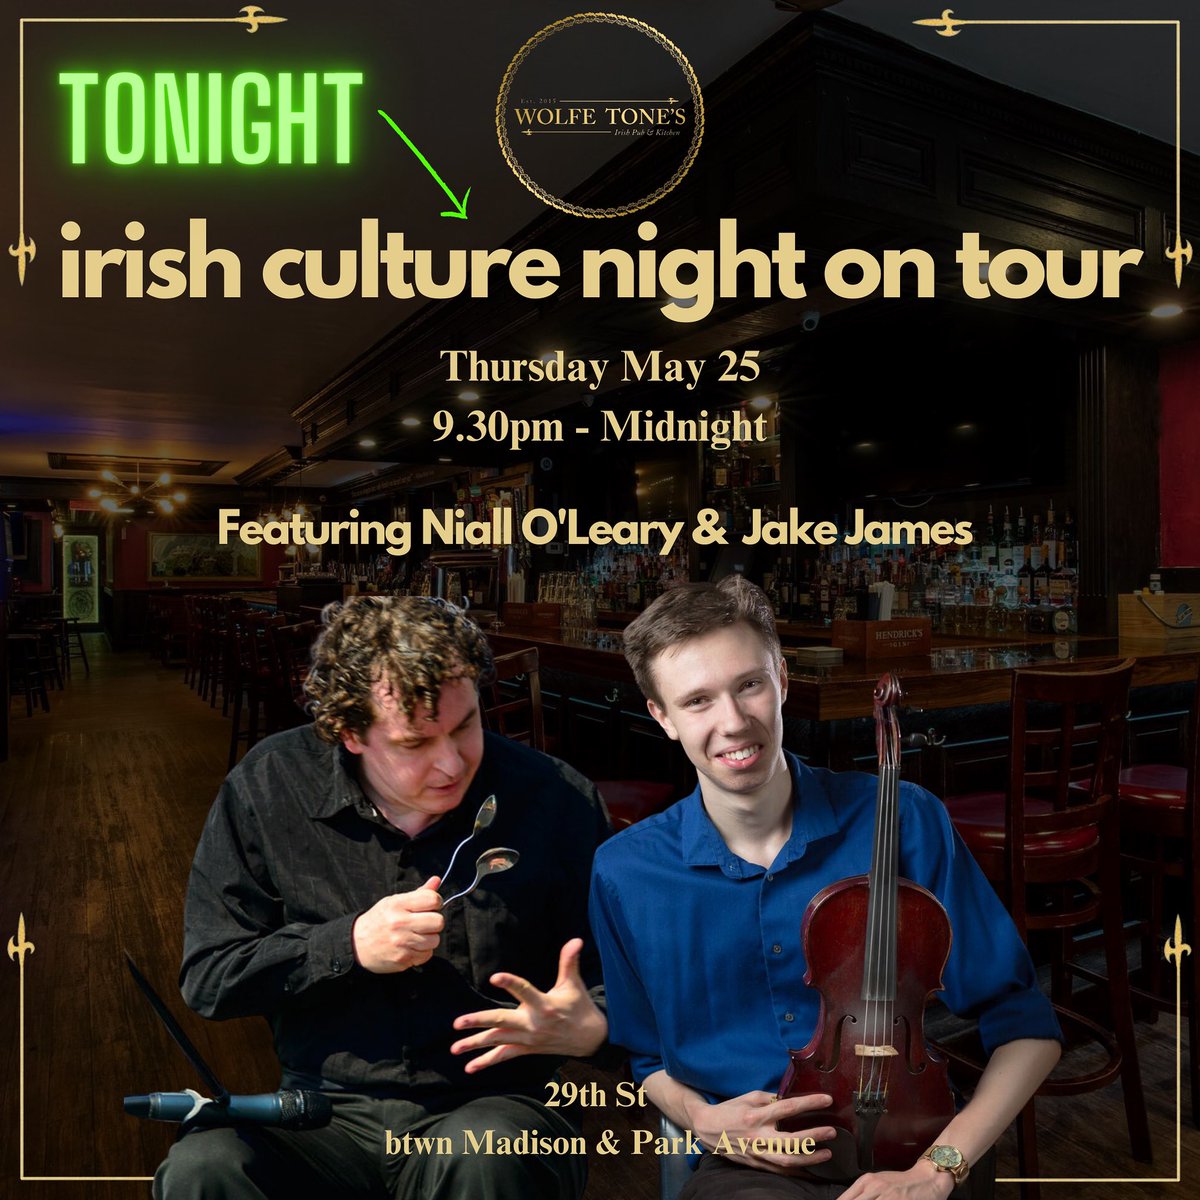 TONIGHT 🎶 
🎶☘️ IRISH CULTURE NIGHT 〰️ ON TOUR 🎵
⏰ 9.30pm - Midnight
✨ Featuring…
⭐️ Niall O'Leary @niallolearymedia (accordion, spoons, percussive dance)
⭐️ Jake James @dontbefakebejake (fiddle, bodhran, percussive dance) 
🎉 Trad Session and Dance Jam, all welcome!